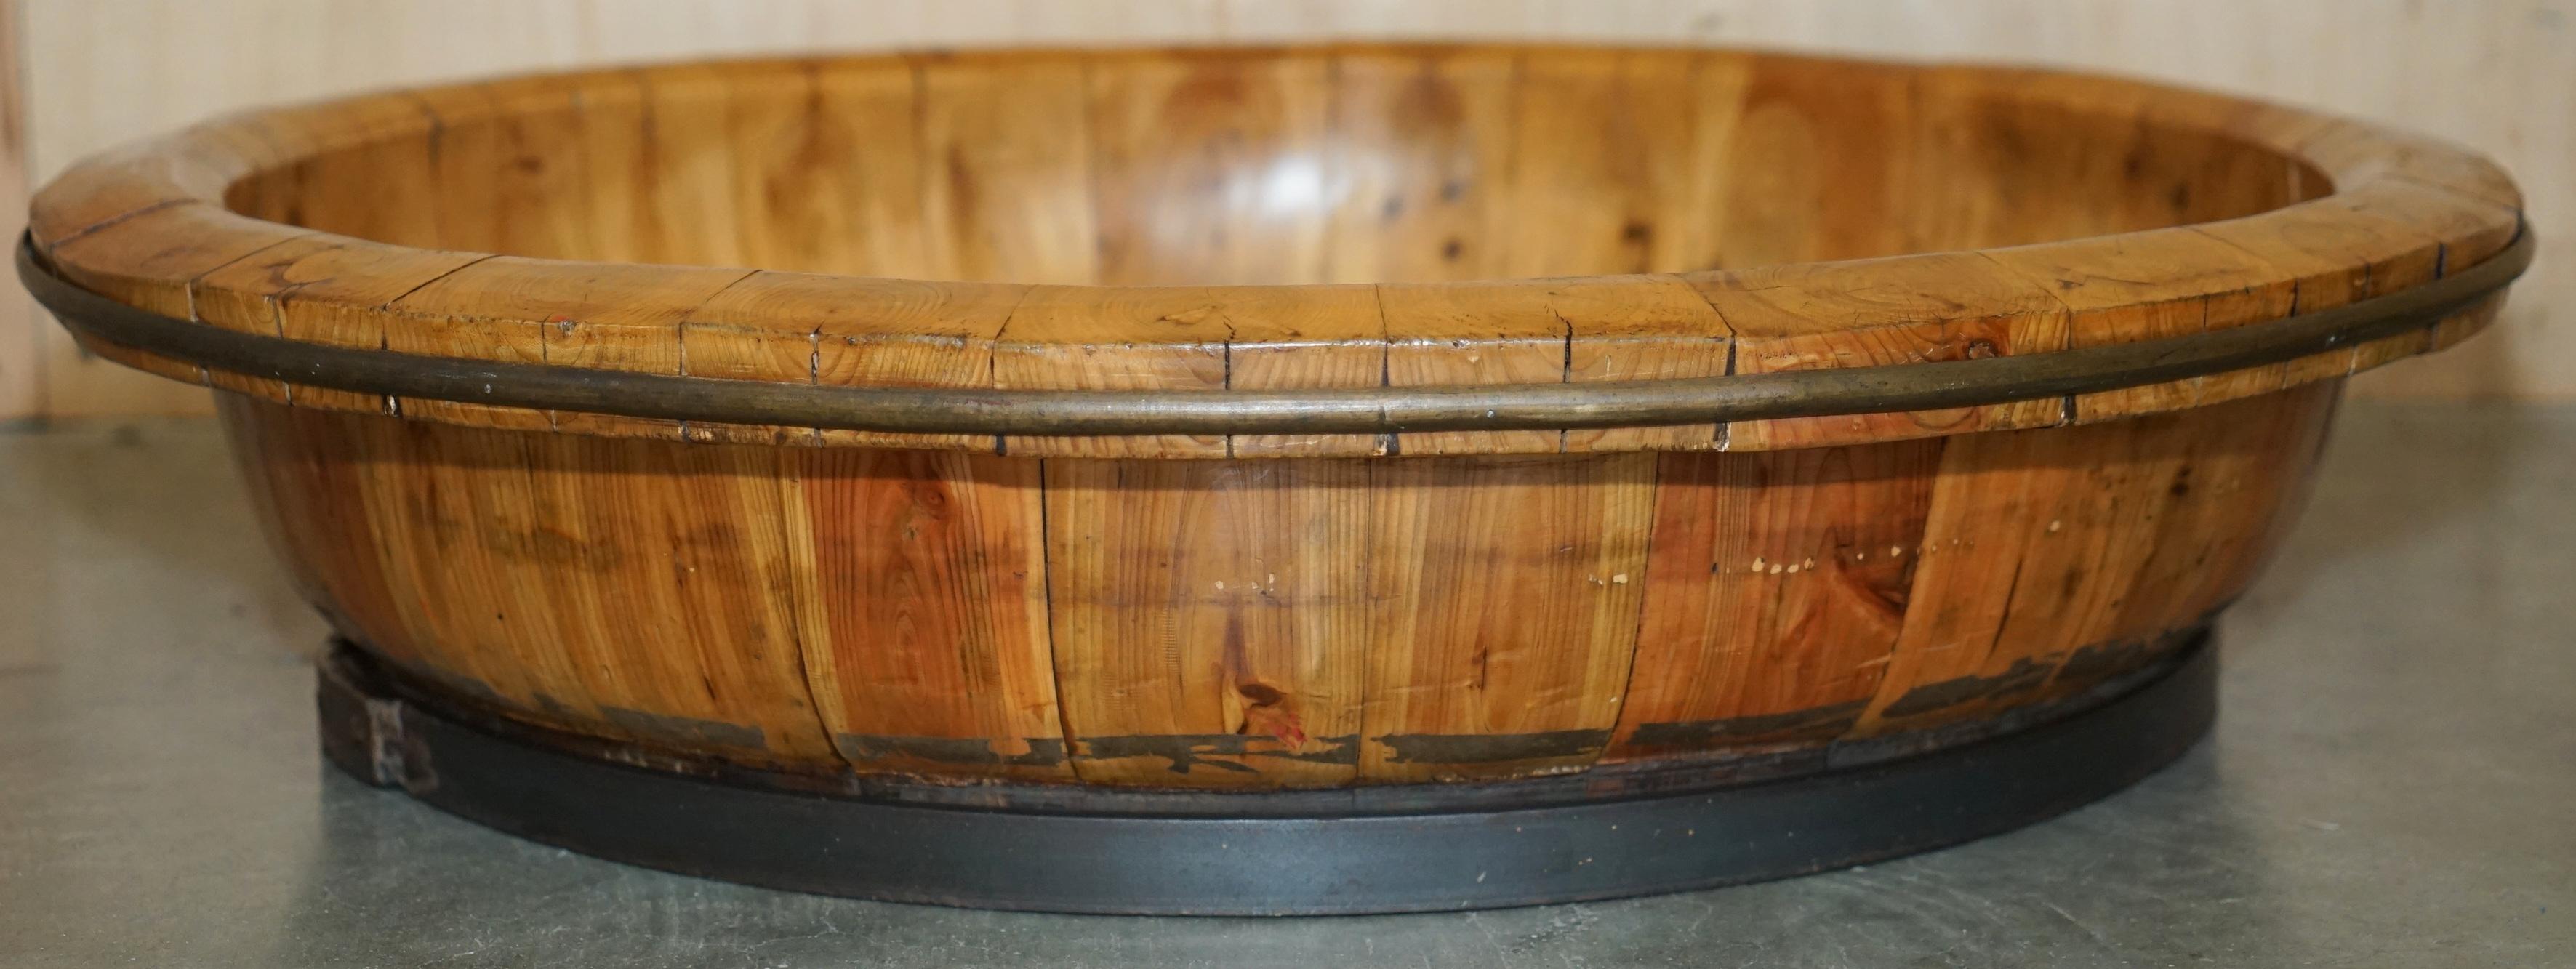 Royal House Antiques

Royal House Antiques is delighted to offer for sale this huge Qing Dynasty Rice Basket with metal braces that can be used as a very large fruit bowl

A good looking decorative and antique bowl, it is super decorative and can be